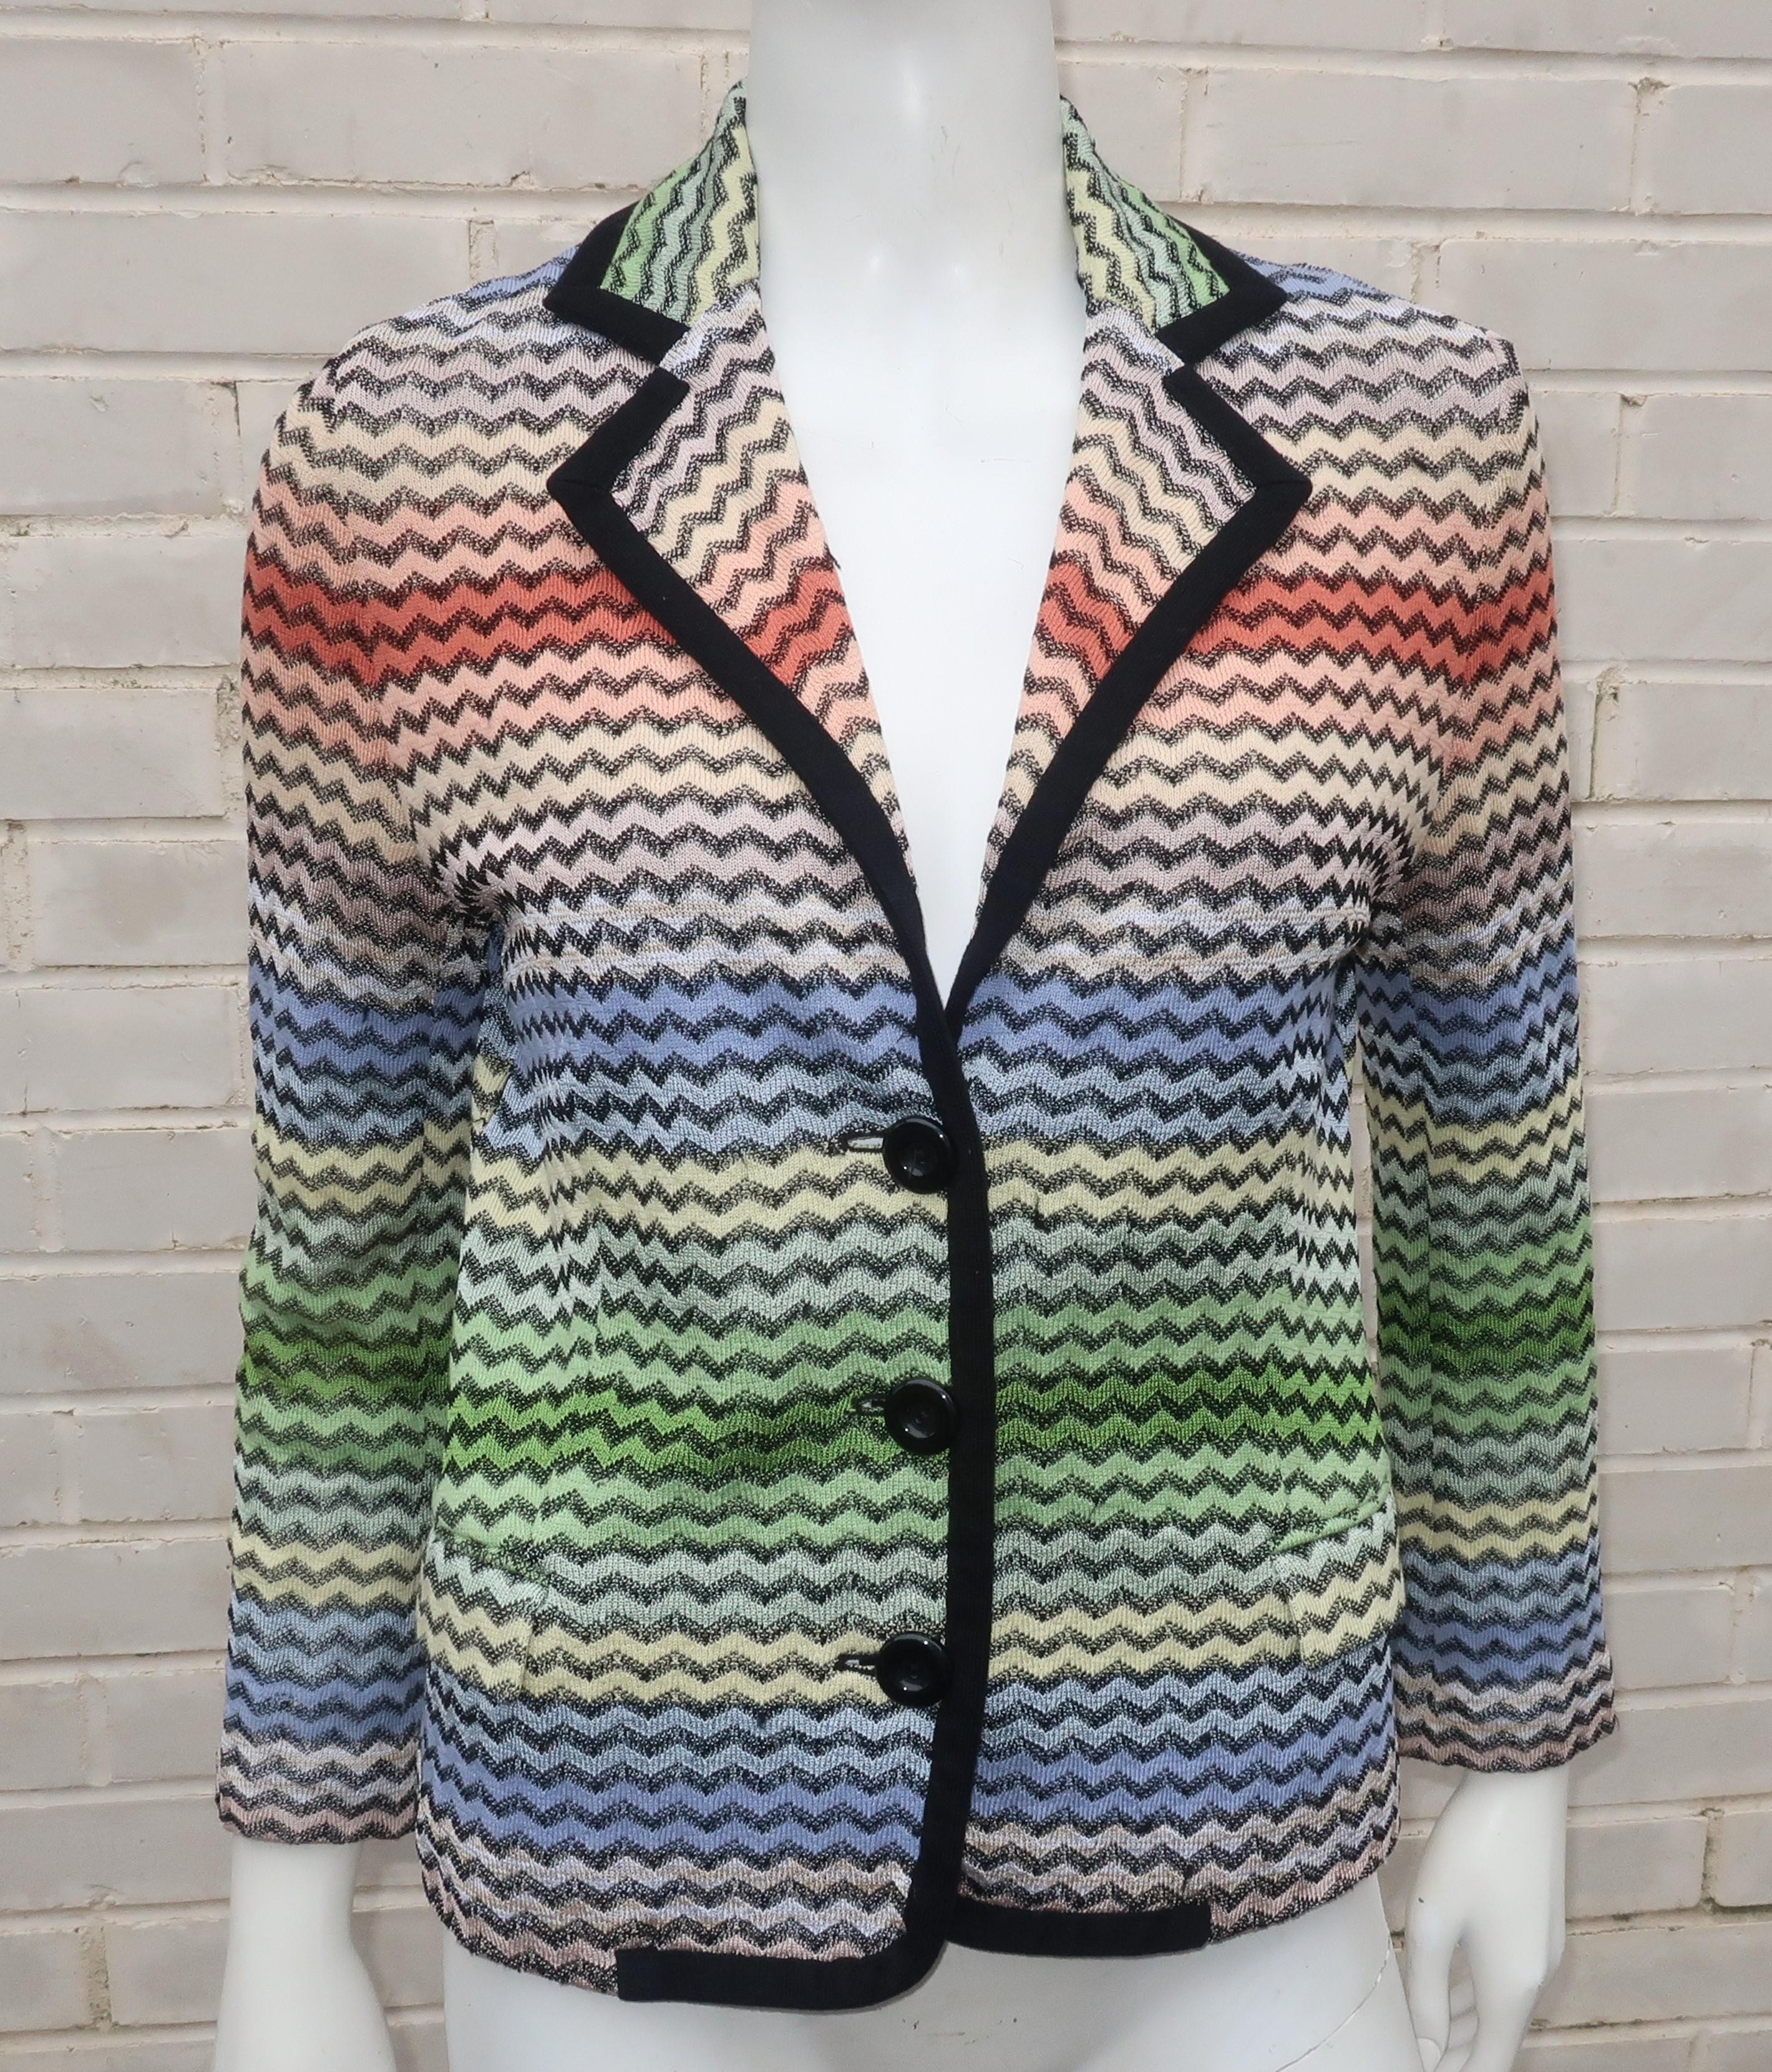 Missoni creates an effortless casual knit jacket with the fashion brands iconic flame stitch design in earth tone shades ranging from terra cotta to blues and greens all outlined in black.  The collared jacket offers an easy fit with a rayon/cotton